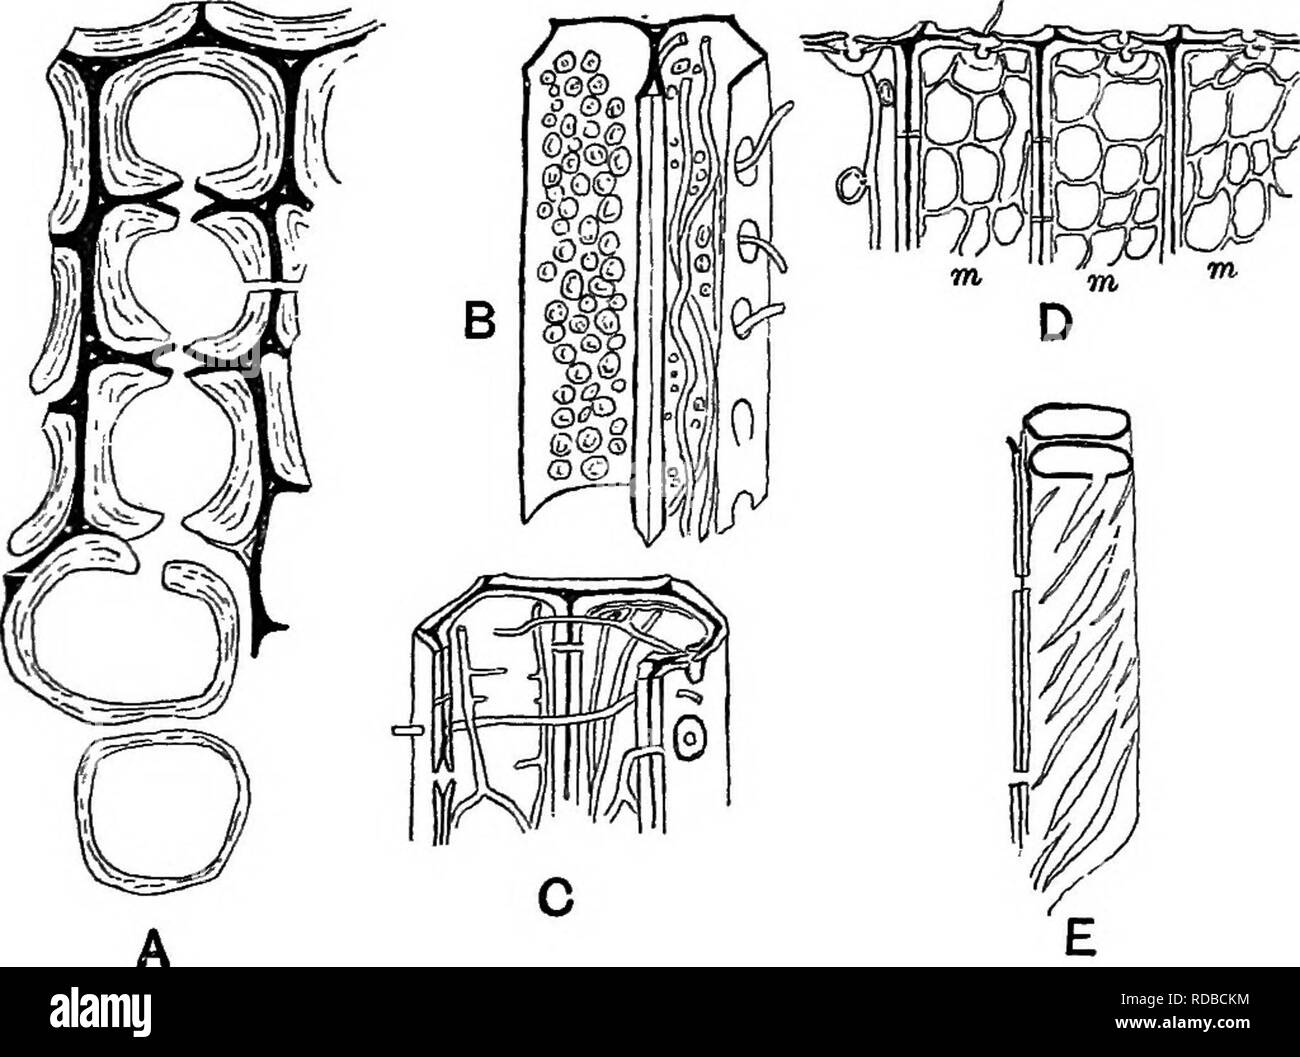 . Fossil plants : for students of botany and geology . Paleobotany. VIl] PATHOLOGY OF FOSSIL TISSUES. 215 described by Etheridge^ from a Permo-Carboniferous coral. This observer records the occurrence of tubular cavities in the calices of Stenopora crinita Lonsd., and attributes their origin to a fungus which he names Palaeoperone endophytica; he mentions one case in which a tube contains fine spherical spore-like bodies which he compares with the spores of a Saprolegnia. As pointed out above (p. 128), it is almost impossible to decide how far these tubes in shells and corals should be attribu Stock Photo